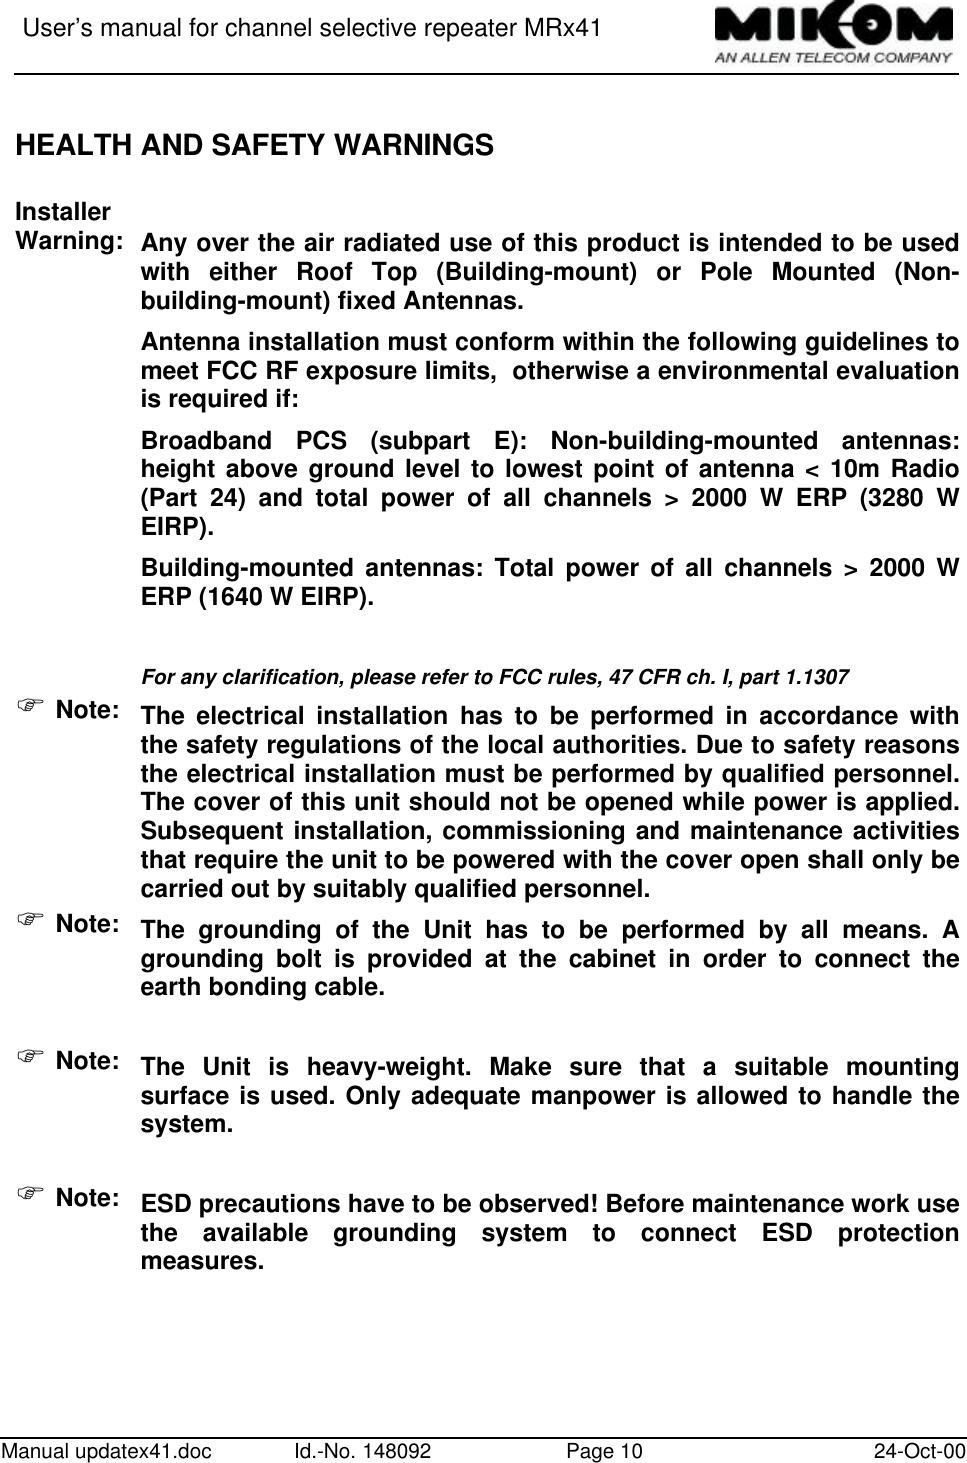 User’s manual for channel selective repeater MRx41Manual updatex41.doc Id.-No. 148092 Page 10 24-Oct-00HEALTH AND SAFETY WARNINGSInstallerWarning: Any over the air radiated use of this product is intended to be usedwith either Roof Top (Building-mount) or Pole Mounted (Non-building-mount) fixed Antennas.Antenna installation must conform within the following guidelines tomeet FCC RF exposure limits,  otherwise a environmental evaluationis required if:Broadband PCS (subpart E): Non-building-mounted antennas:height above ground level to lowest point of antenna &lt; 10m Radio(Part 24) and total power of all channels &gt; 2000 W ERP (3280 WEIRP).Building-mounted antennas: Total power of all channels &gt; 2000 WERP (1640 W EIRP).For any clarification, please refer to FCC rules, 47 CFR ch. I, part 1.1307F Note: The electrical installation has to be performed in accordance withthe safety regulations of the local authorities. Due to safety reasonsthe electrical installation must be performed by qualified personnel.The cover of this unit should not be opened while power is applied.Subsequent installation, commissioning and maintenance activitiesthat require the unit to be powered with the cover open shall only becarried out by suitably qualified personnel.F Note: The grounding of the Unit has to be performed by all means. Agrounding bolt is provided at the cabinet in order to connect theearth bonding cable.F Note: The Unit is heavy-weight. Make sure that a suitable mountingsurface is used. Only adequate manpower is allowed to handle thesystem.F Note: ESD precautions have to be observed! Before maintenance work usethe available grounding system to connect ESD protectionmeasures.